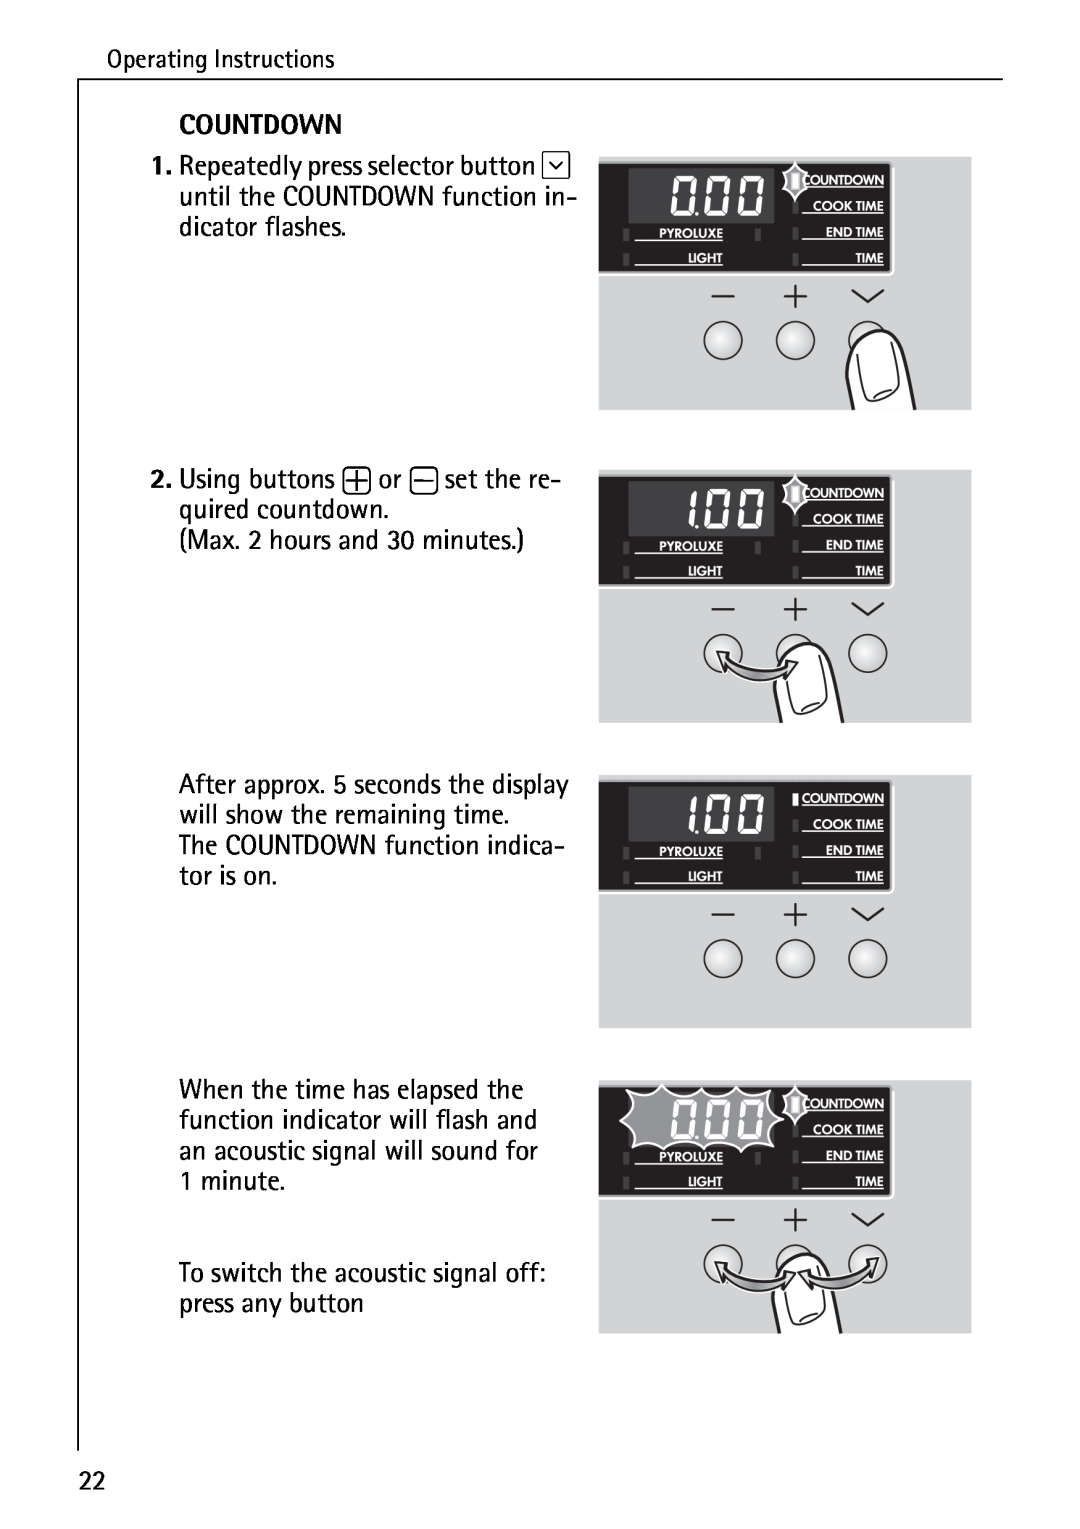 Electrolux B6140-1 manual Countdown, Using buttons + or - set the re- quired countdown 